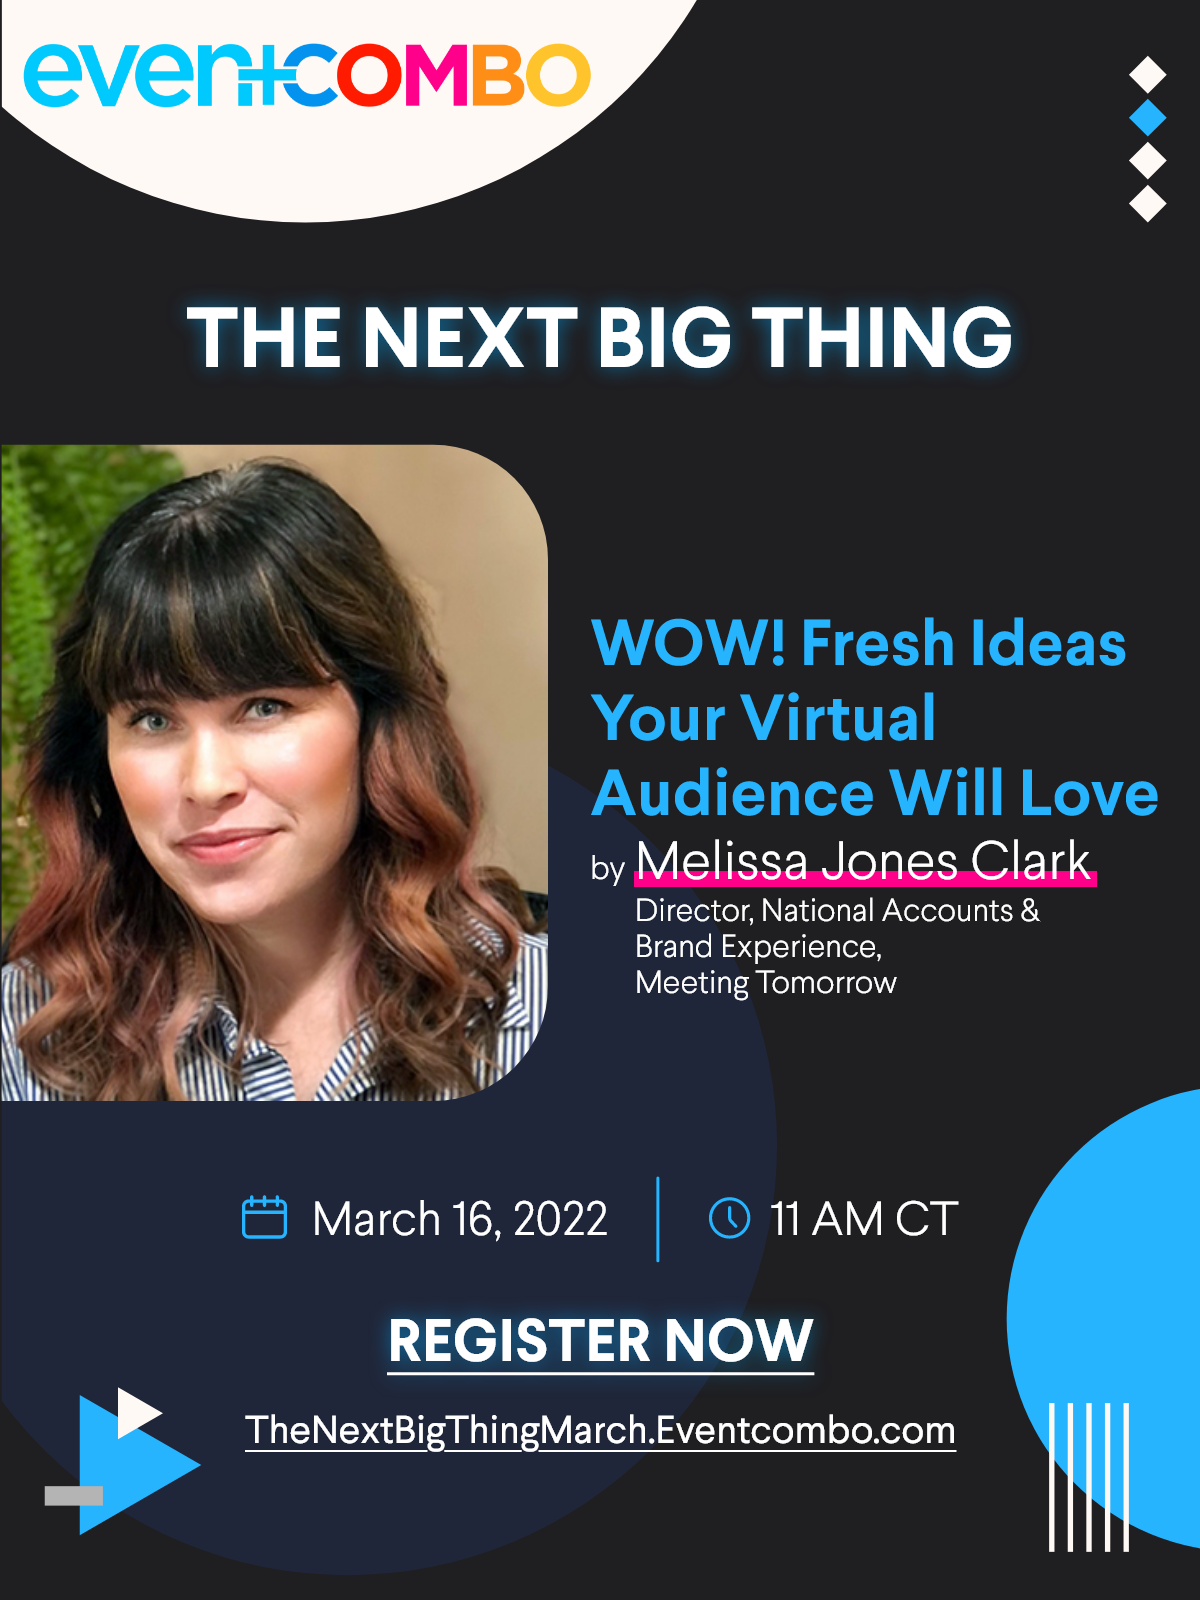 Wow! Fresh Ideas Your Virtual Audience Will Love with Melissa Jones Clark. The Next Big Thing, a Webinar Series by Eventcombo